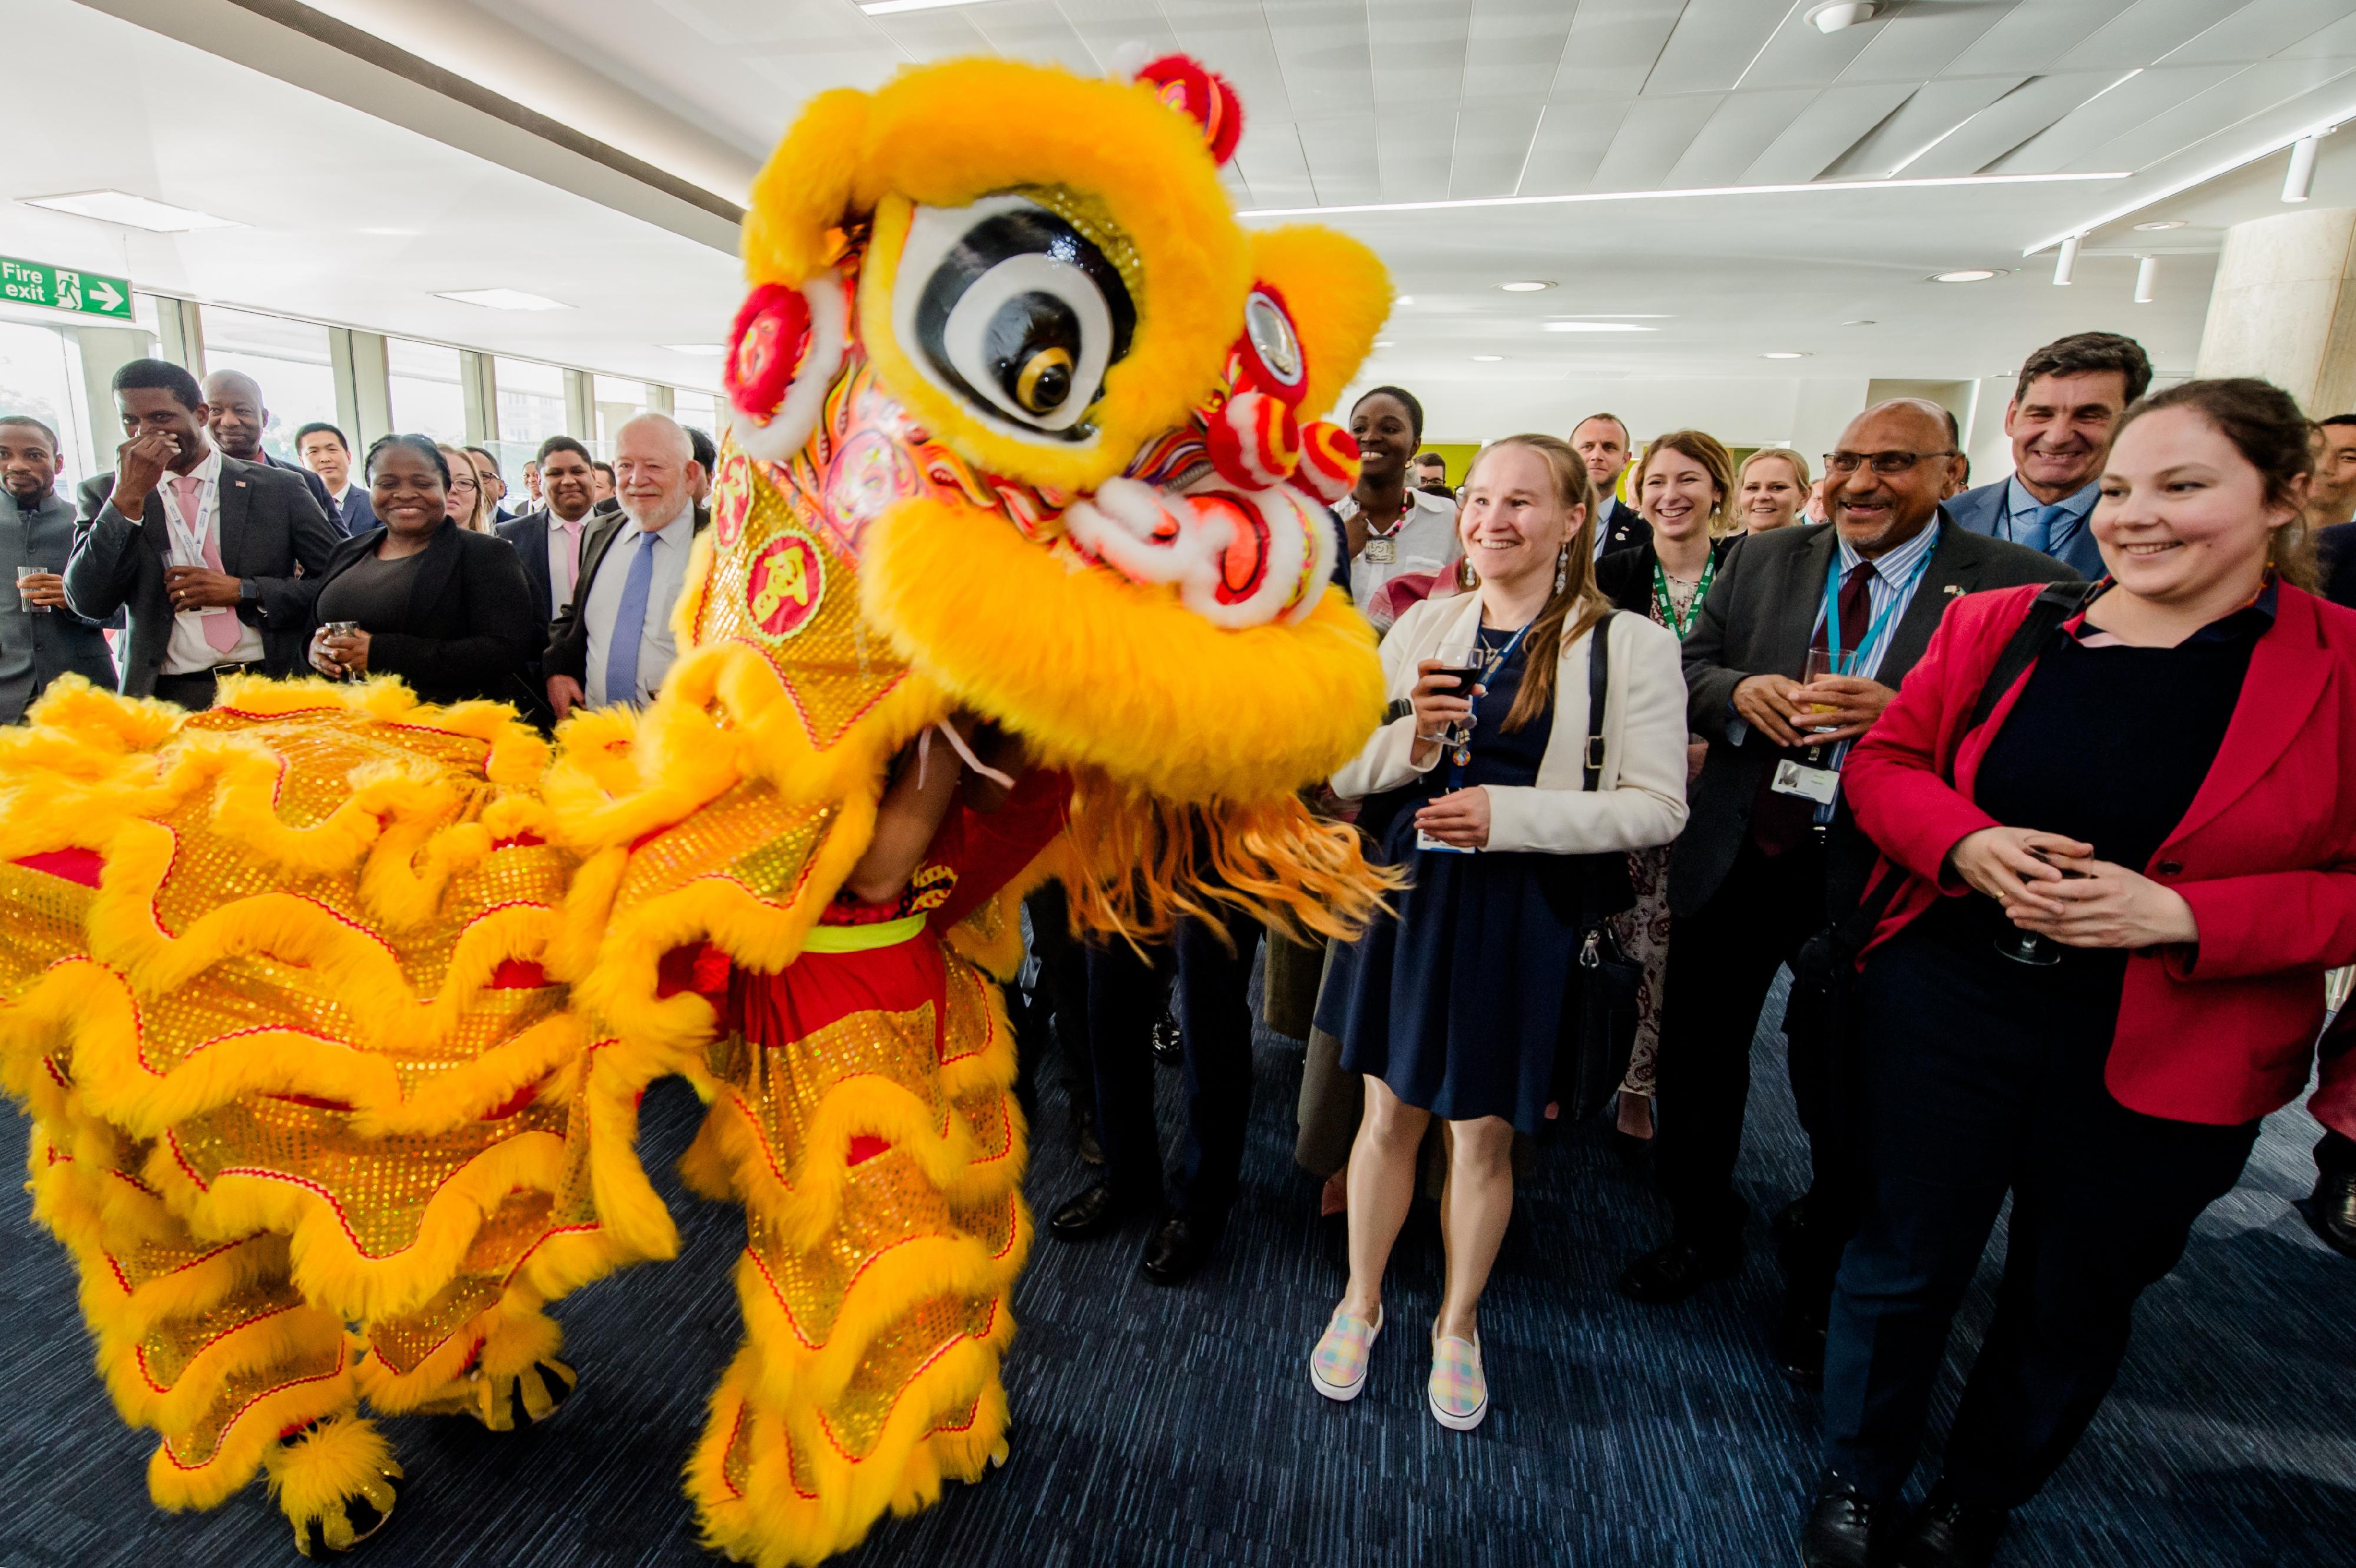 The Hong Kong Economic and Trade Office, London, with the support of the Marine Department, held the Taste of Hong Kong reception at the International Maritime Organization on May 23 (London time). Photo shows the lion dance performance at the reception.